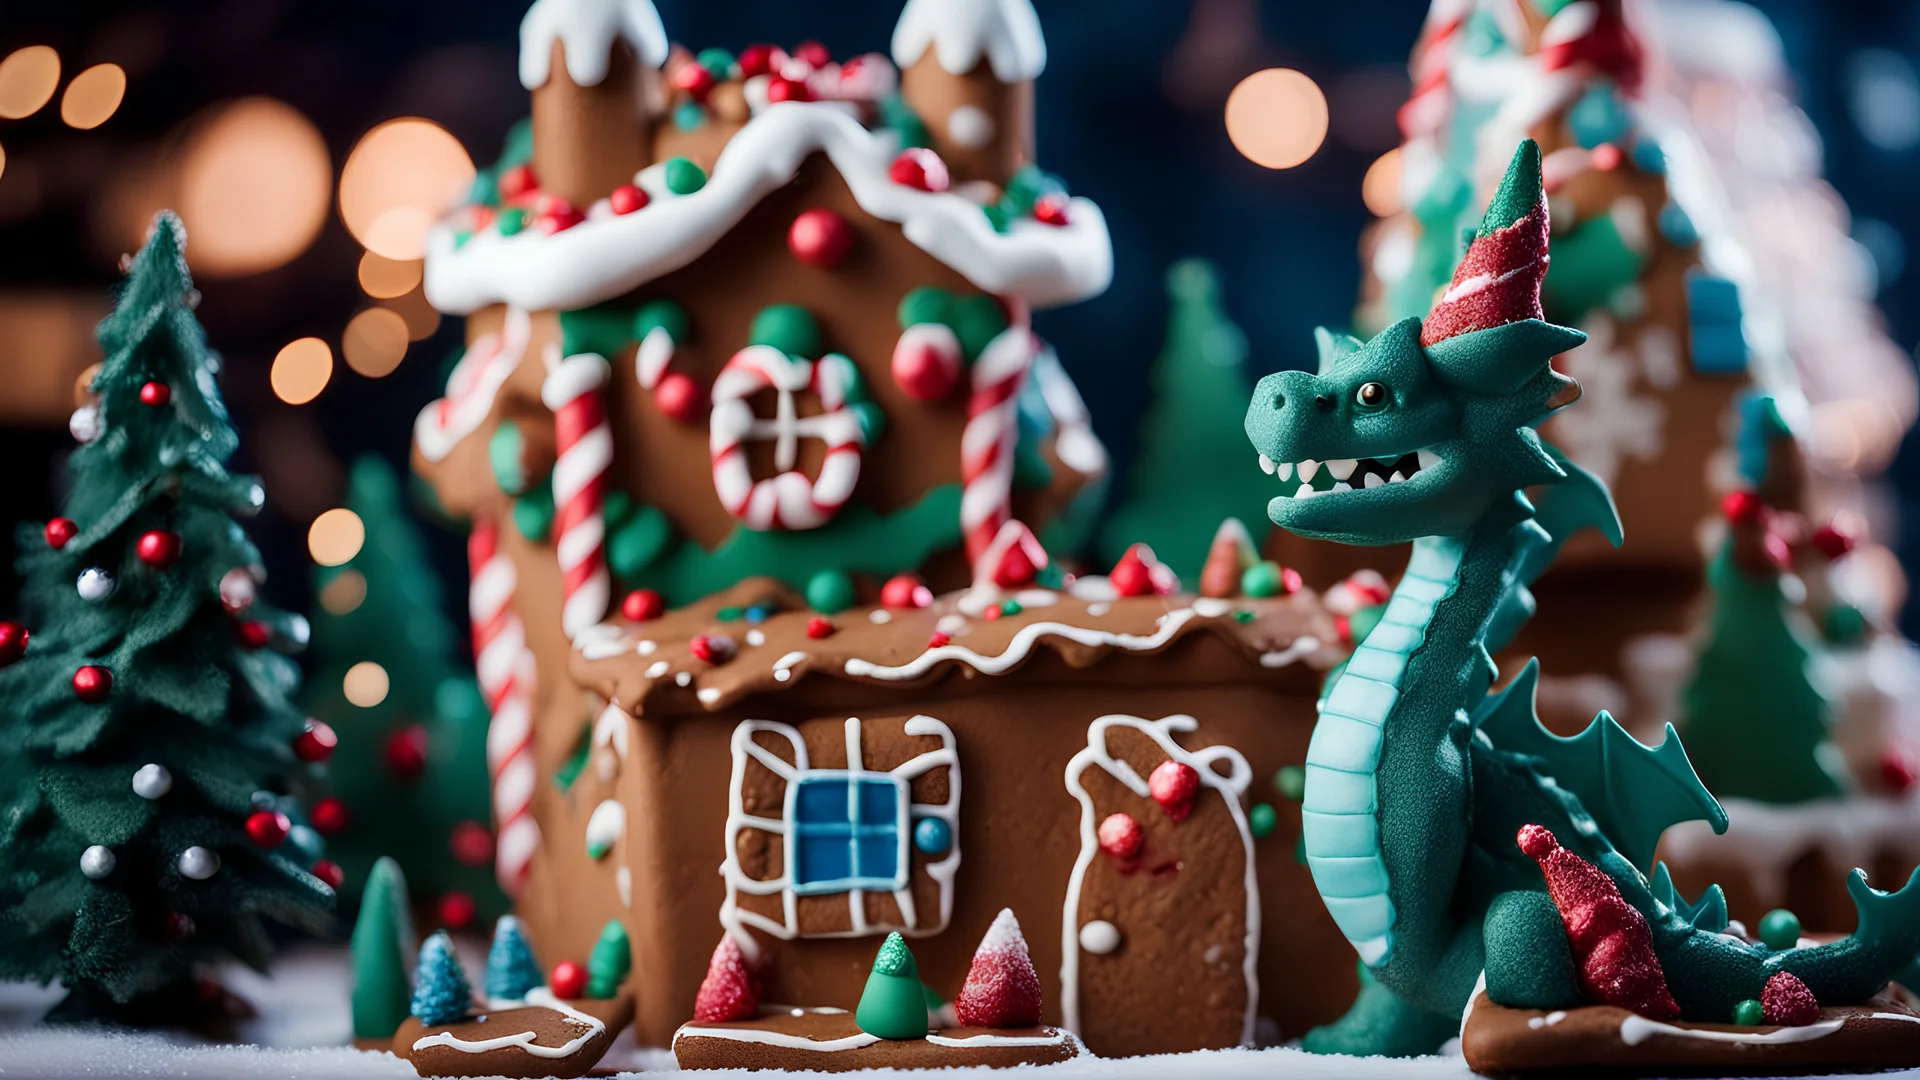 A green dragon in a Christmas hat eats a large gingerbread house, a background in blue tones with lights and decorated Christmas trees, Camera settings: Shot with a Canon EOS 5D Mark IV. Film used is Kodak Portra 400, known for its rich and natural colors. The lens used is a Canon EF 50mm f/1.4, capturing the details and textures of the flowers with precision. The photo is taken with a shallow depth of field, beautifully blurring the background while keeping the flowers in sharp focus